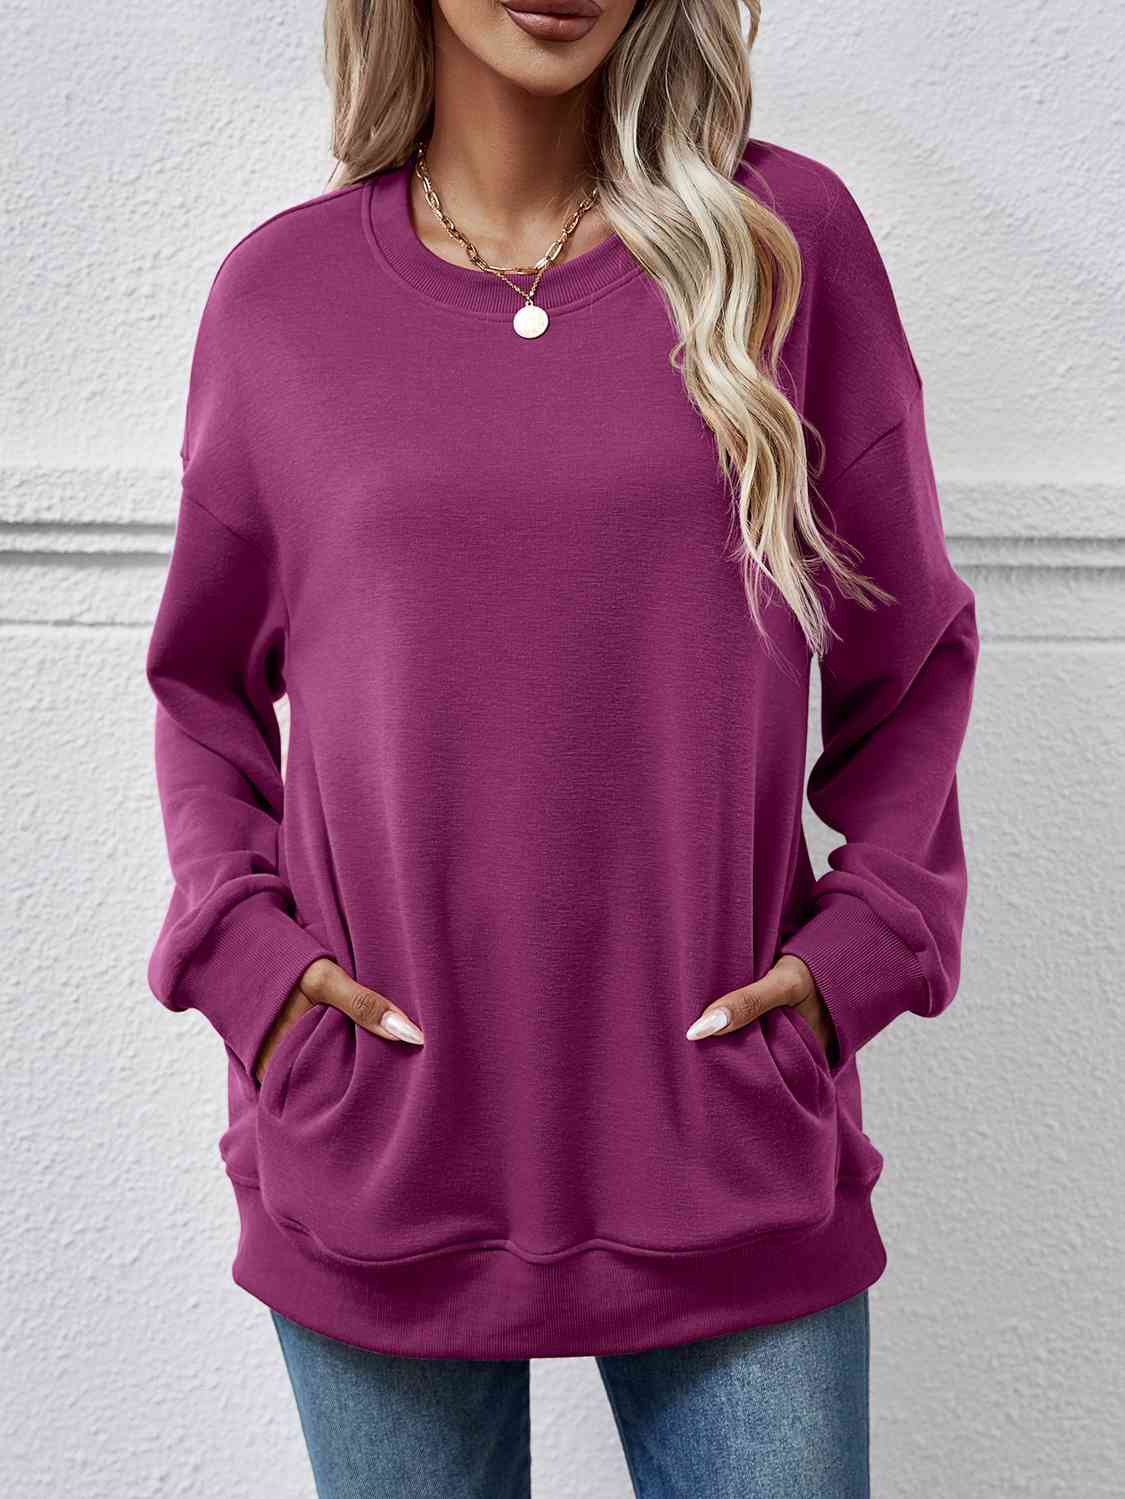 Dropped Shoulder Sweatshirt with Pockets king-general-store-5710.myshopify.com